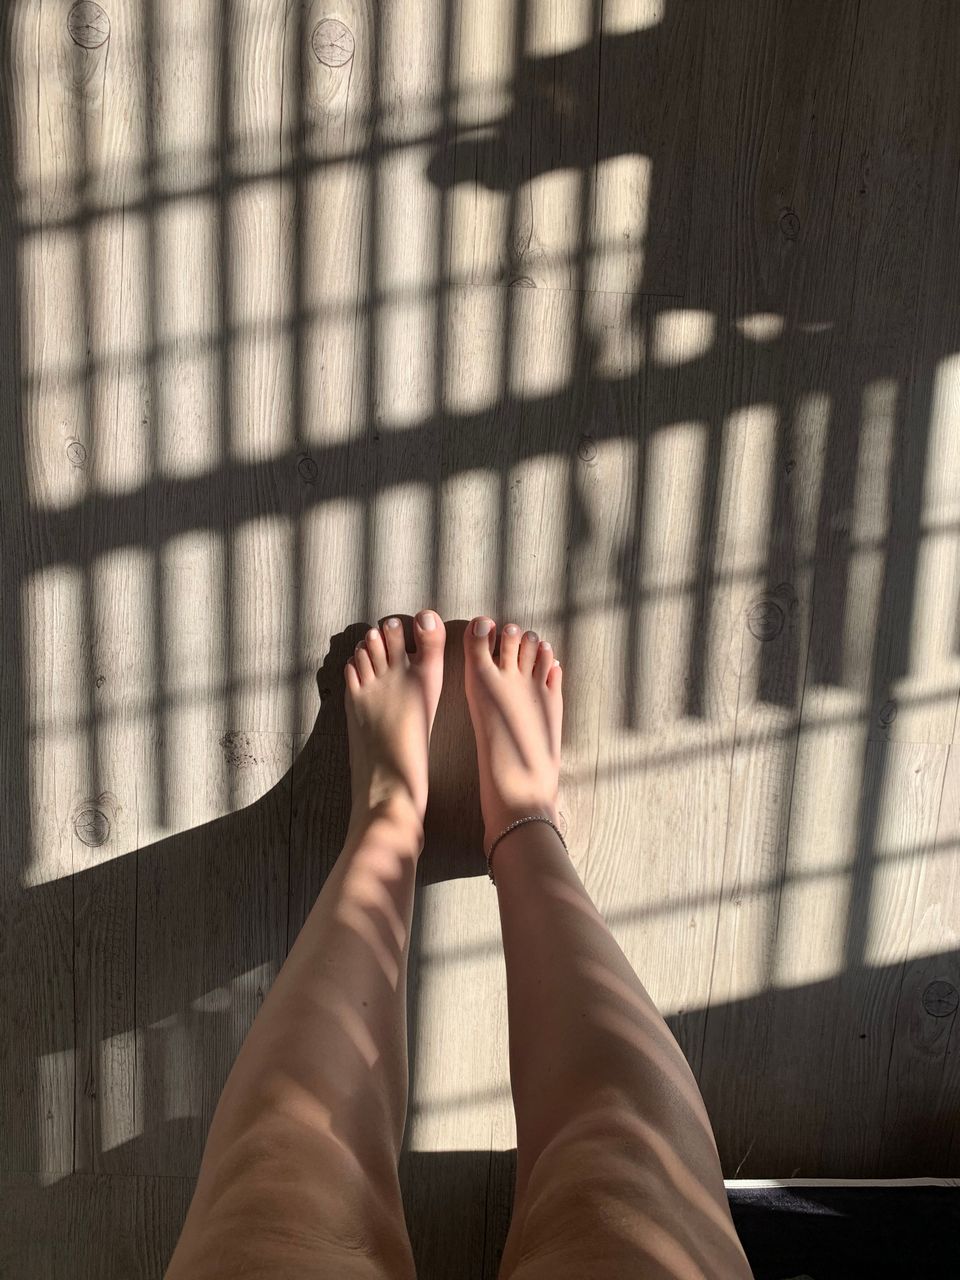 Stacey Lee Shadow Play And Dirty Feet